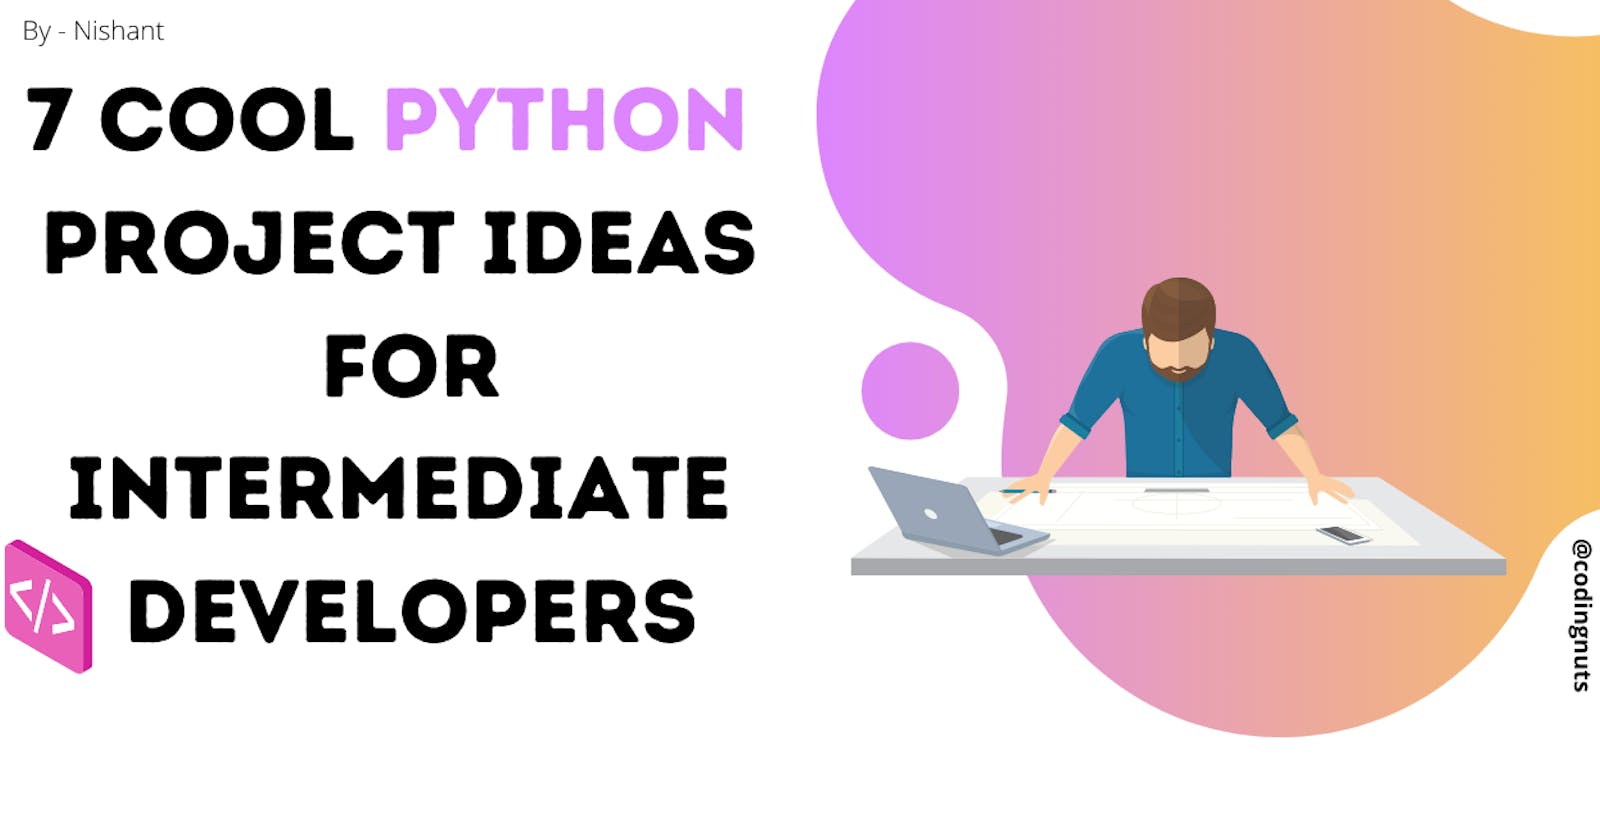 7 Cool Python Project Ideas for Intermediate Developers